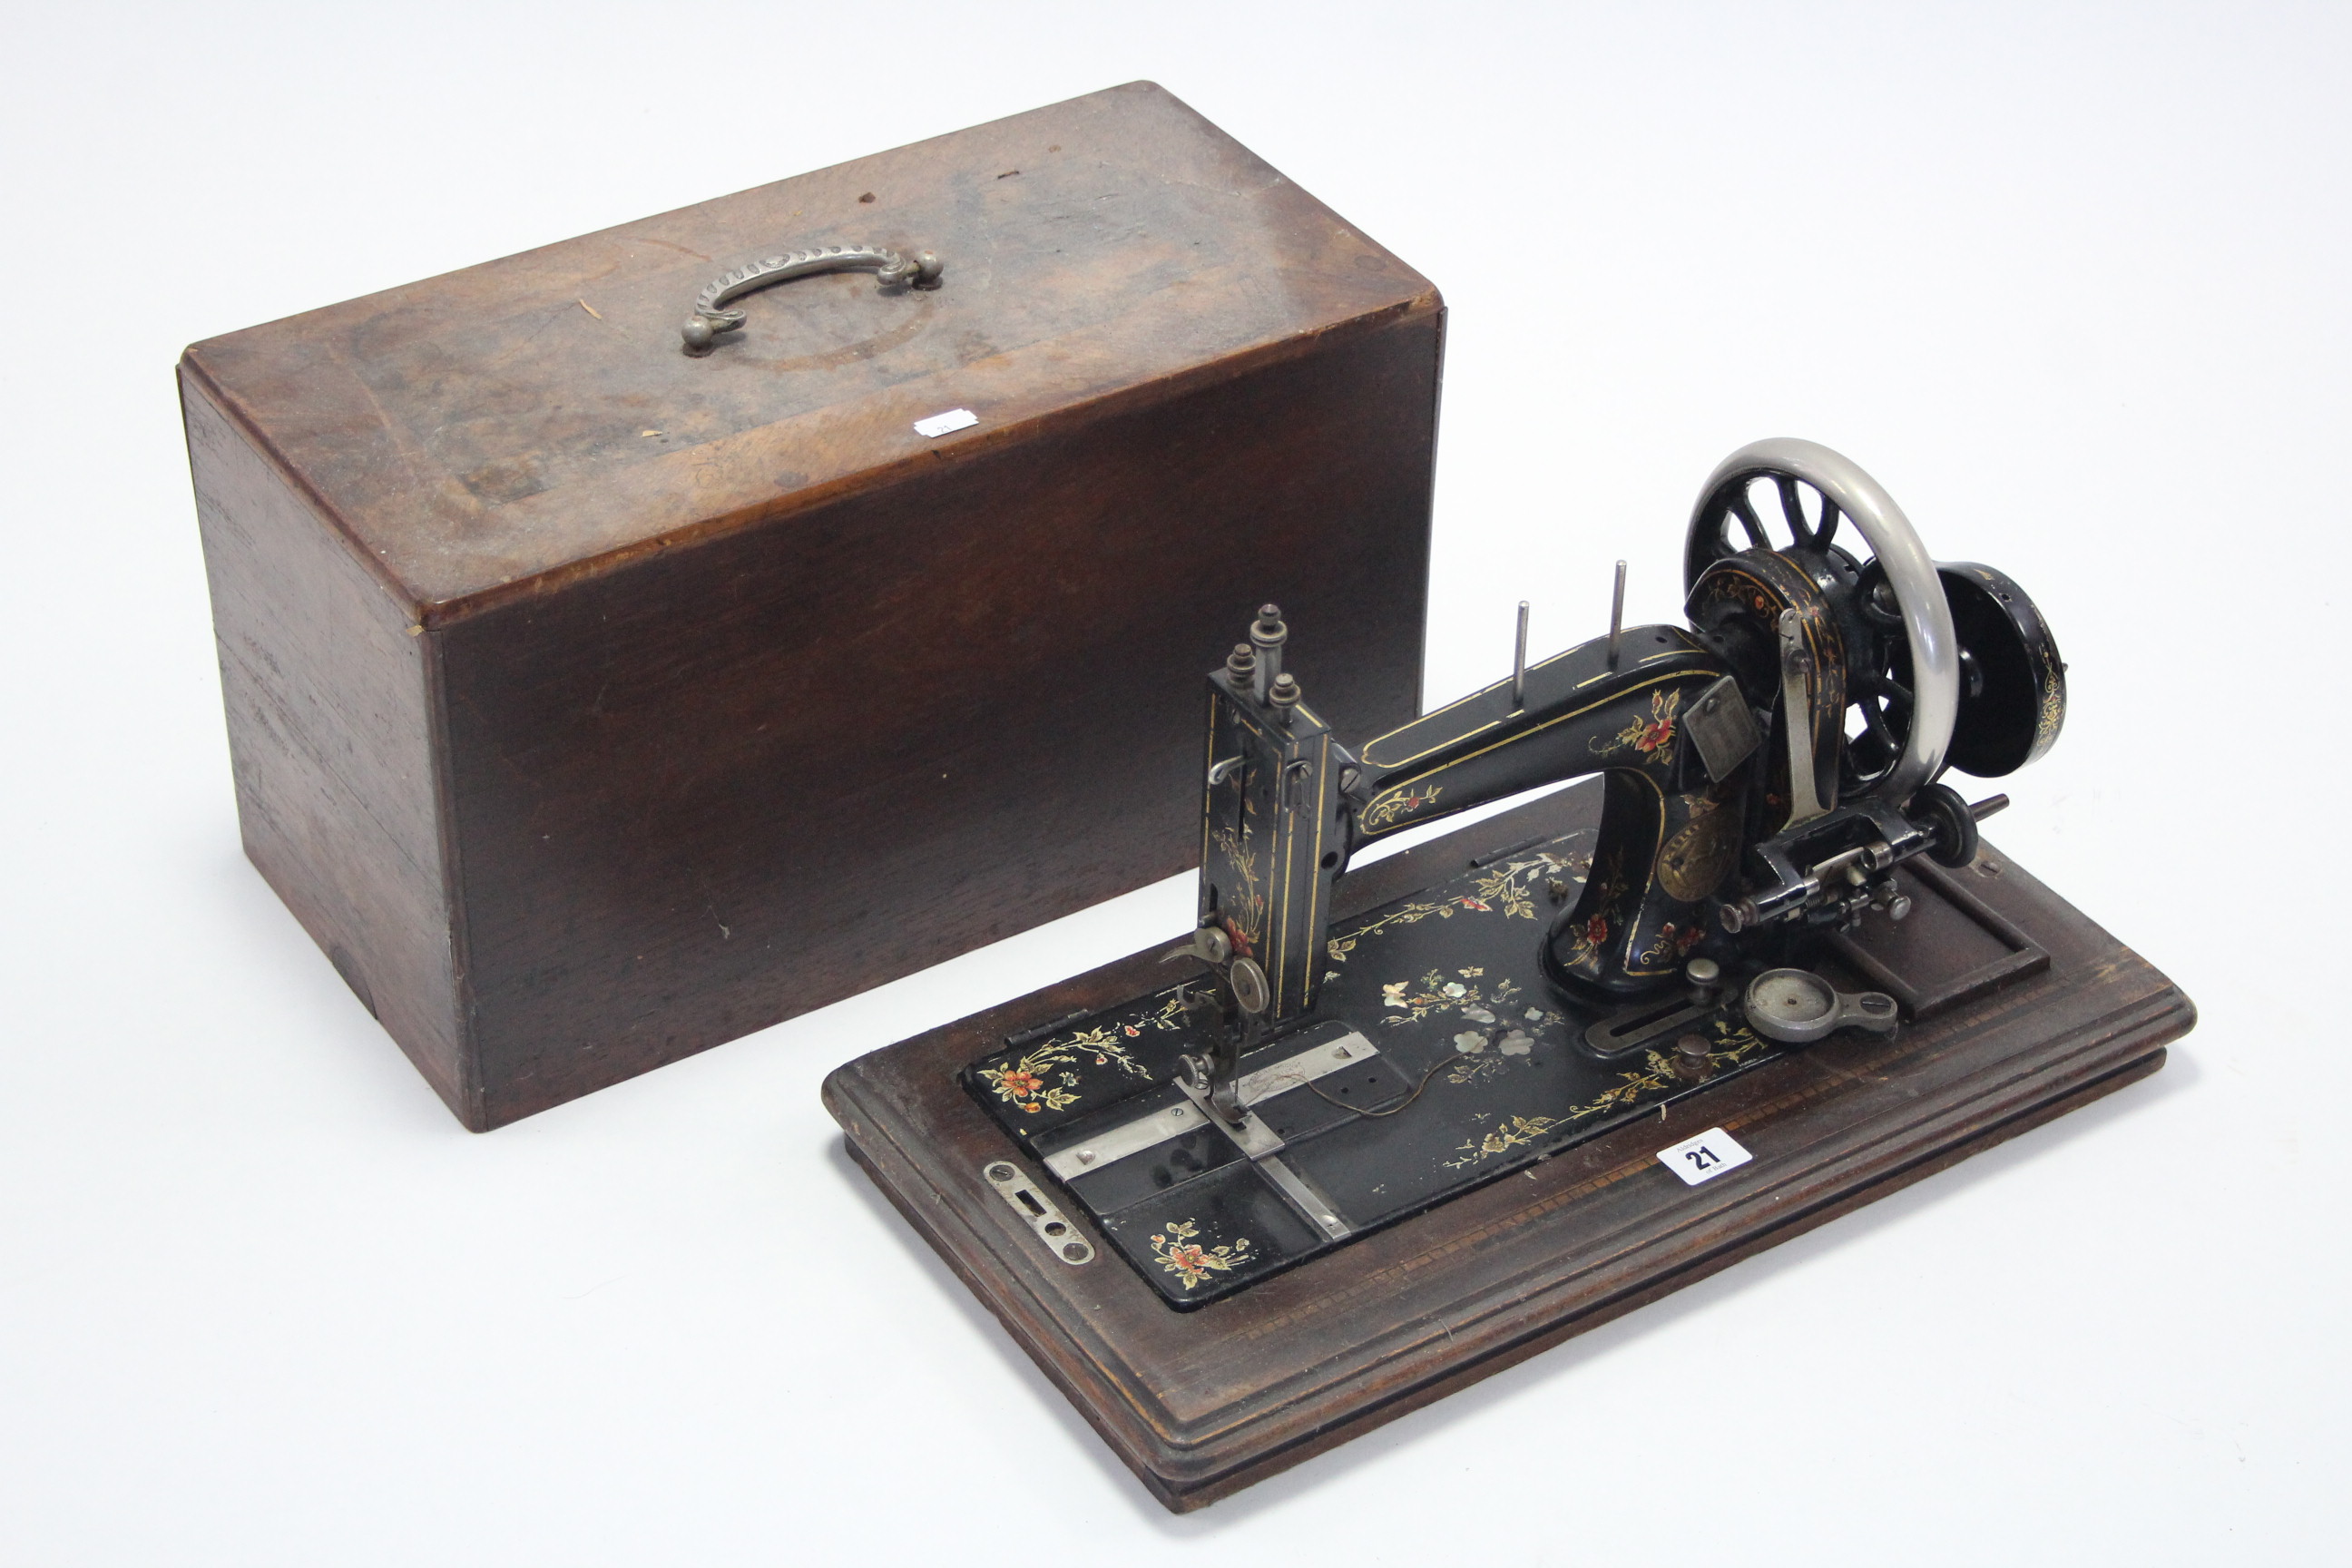 A late 19th/early 20th century hand sewing machine by J. Collier & Sons of London, with walnut